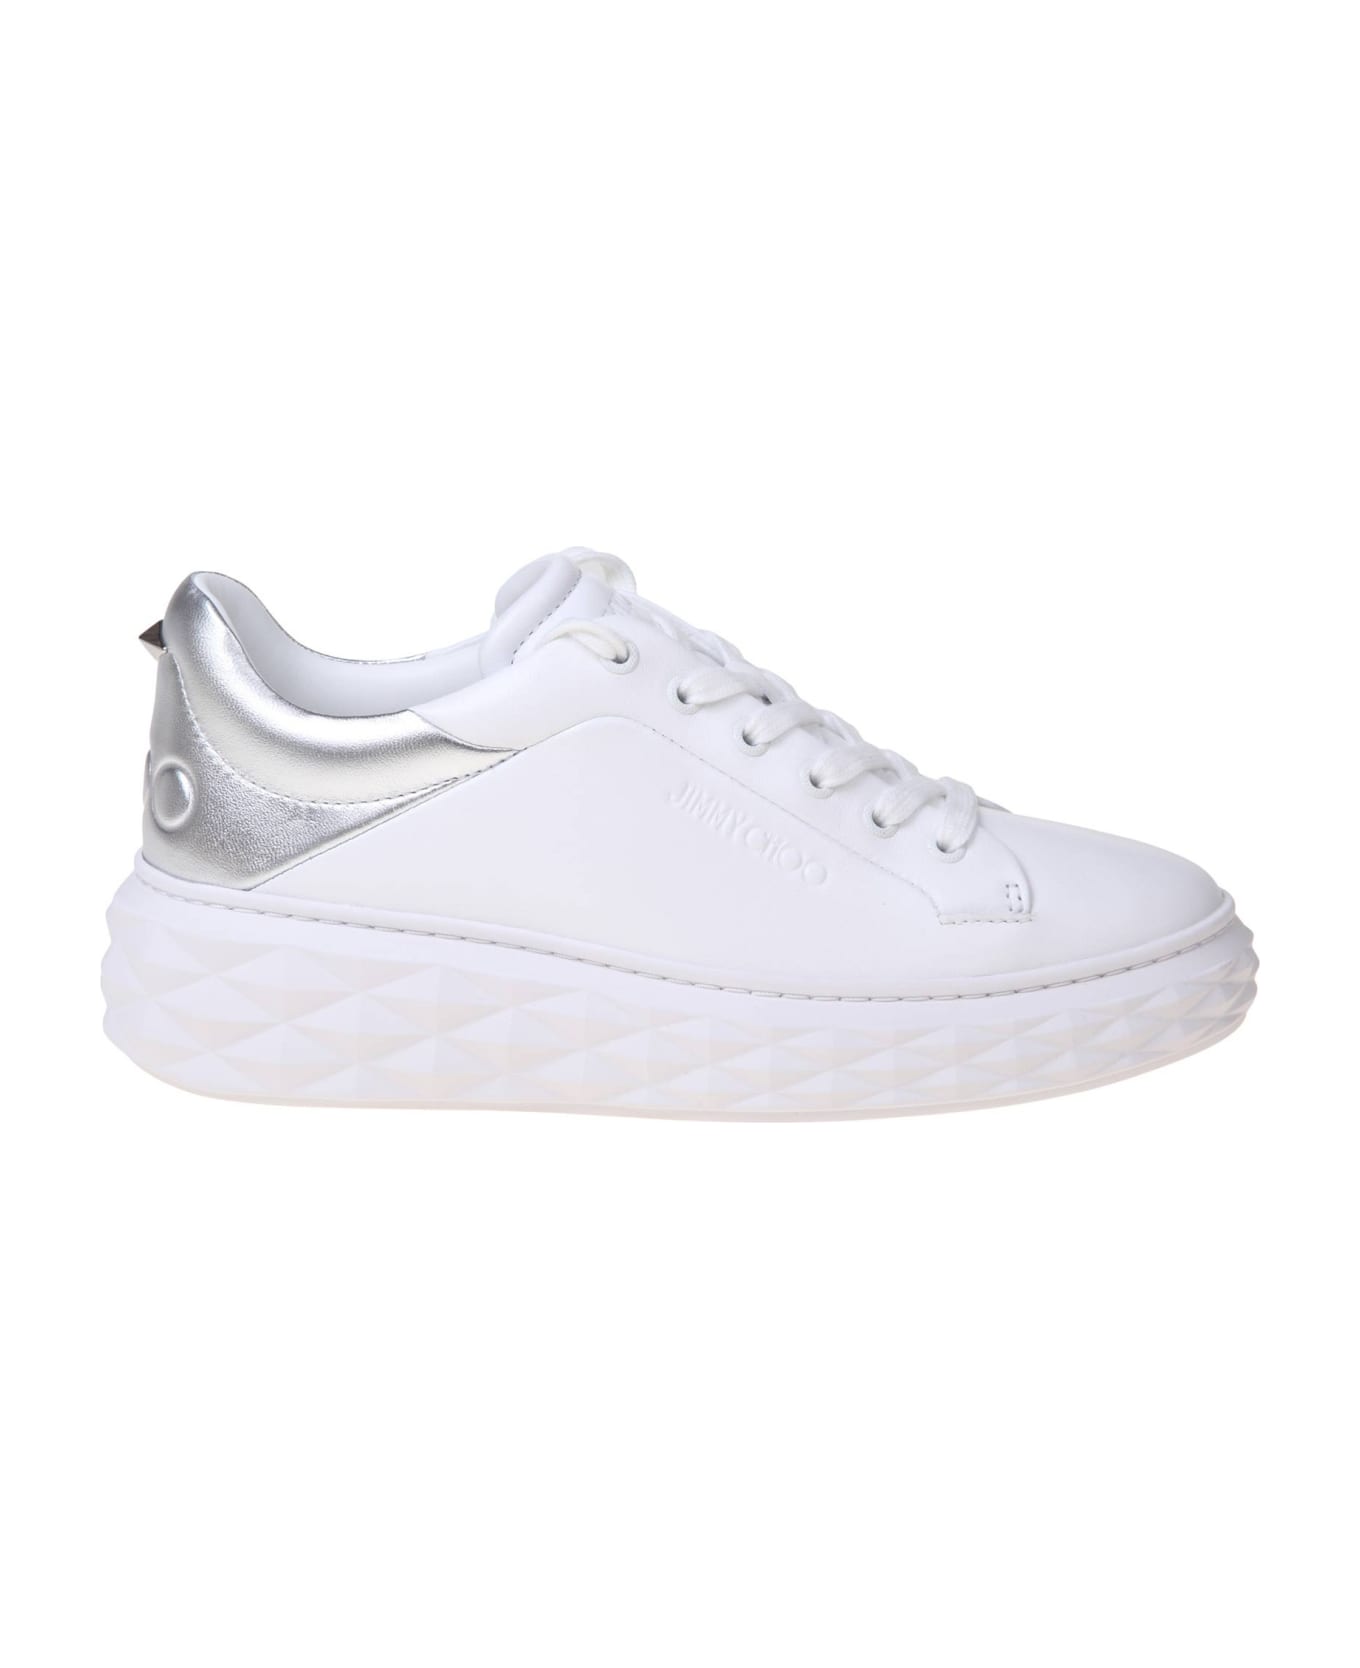 Jimmy Choo Diamond Maxi Sneakers In White And Silver Leather - White